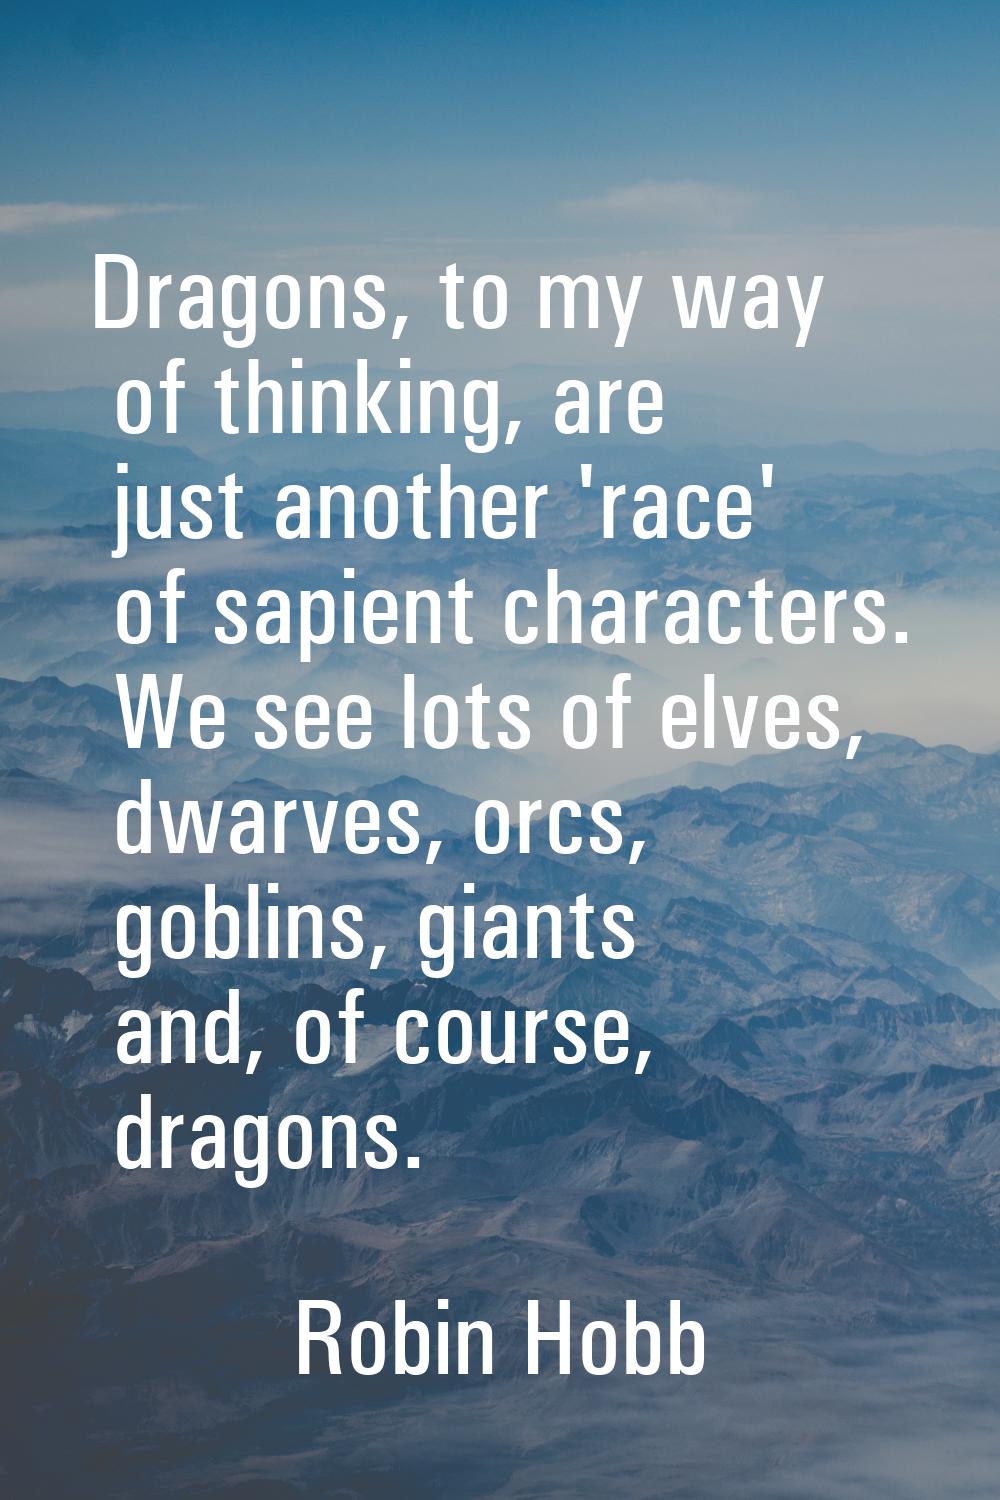 Dragons, to my way of thinking, are just another 'race' of sapient characters. We see lots of elves